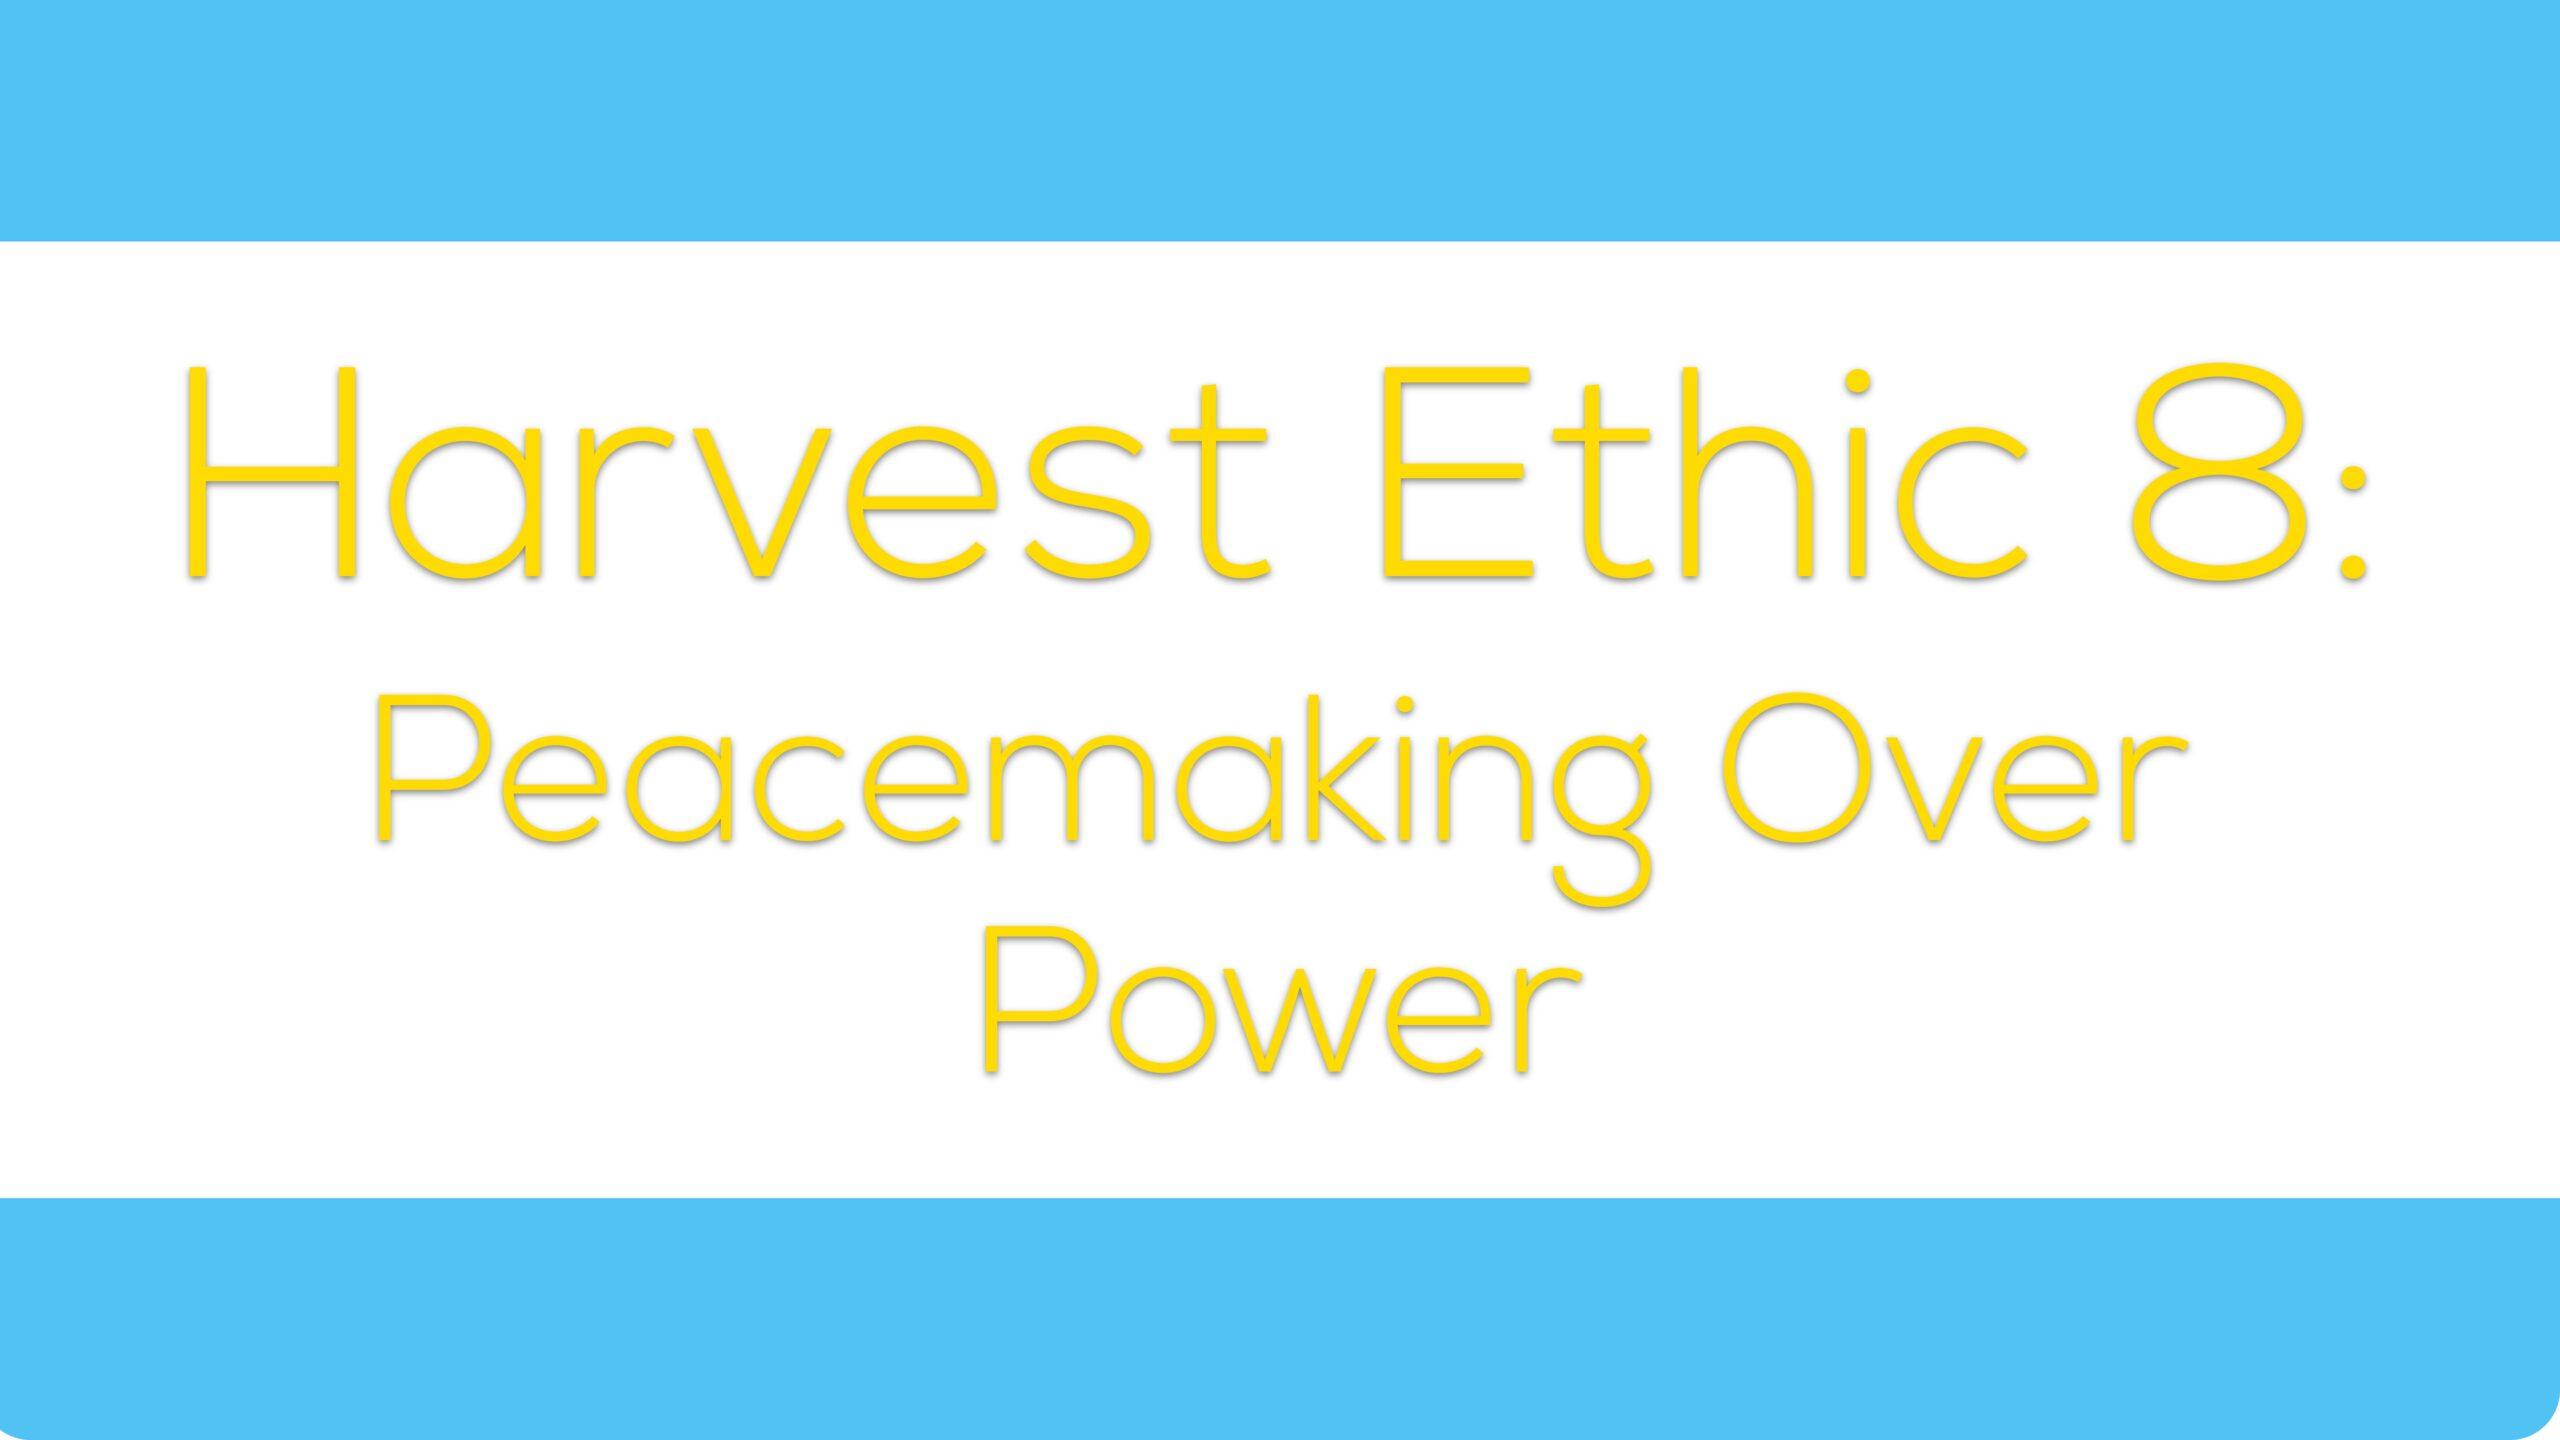 Harvest Ethic 8: Peacemaking Over Power